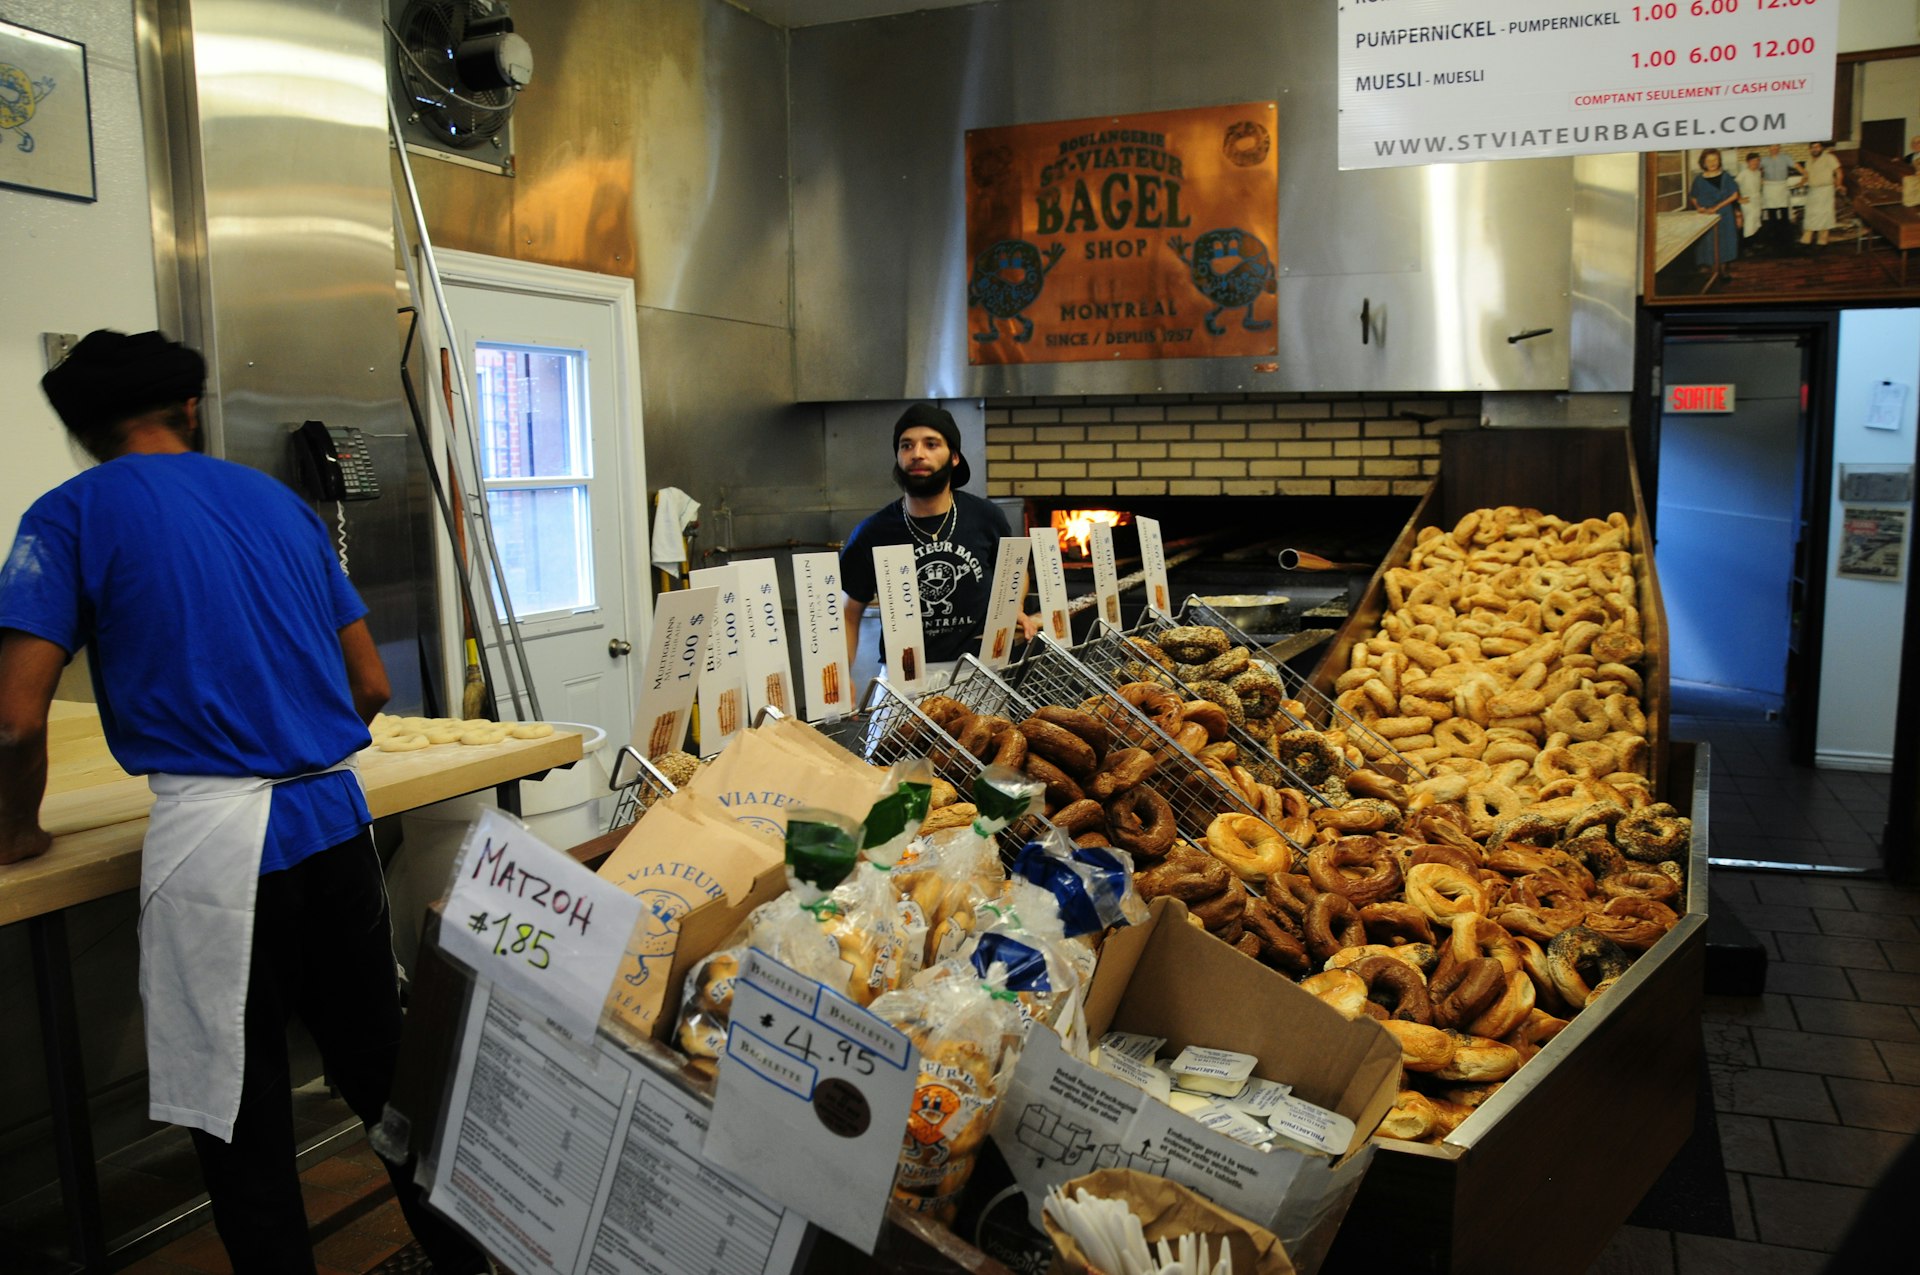 Workers with piles of baked goods in Boulangerie St-Viateur Bagel Shop, Montréal, Canada